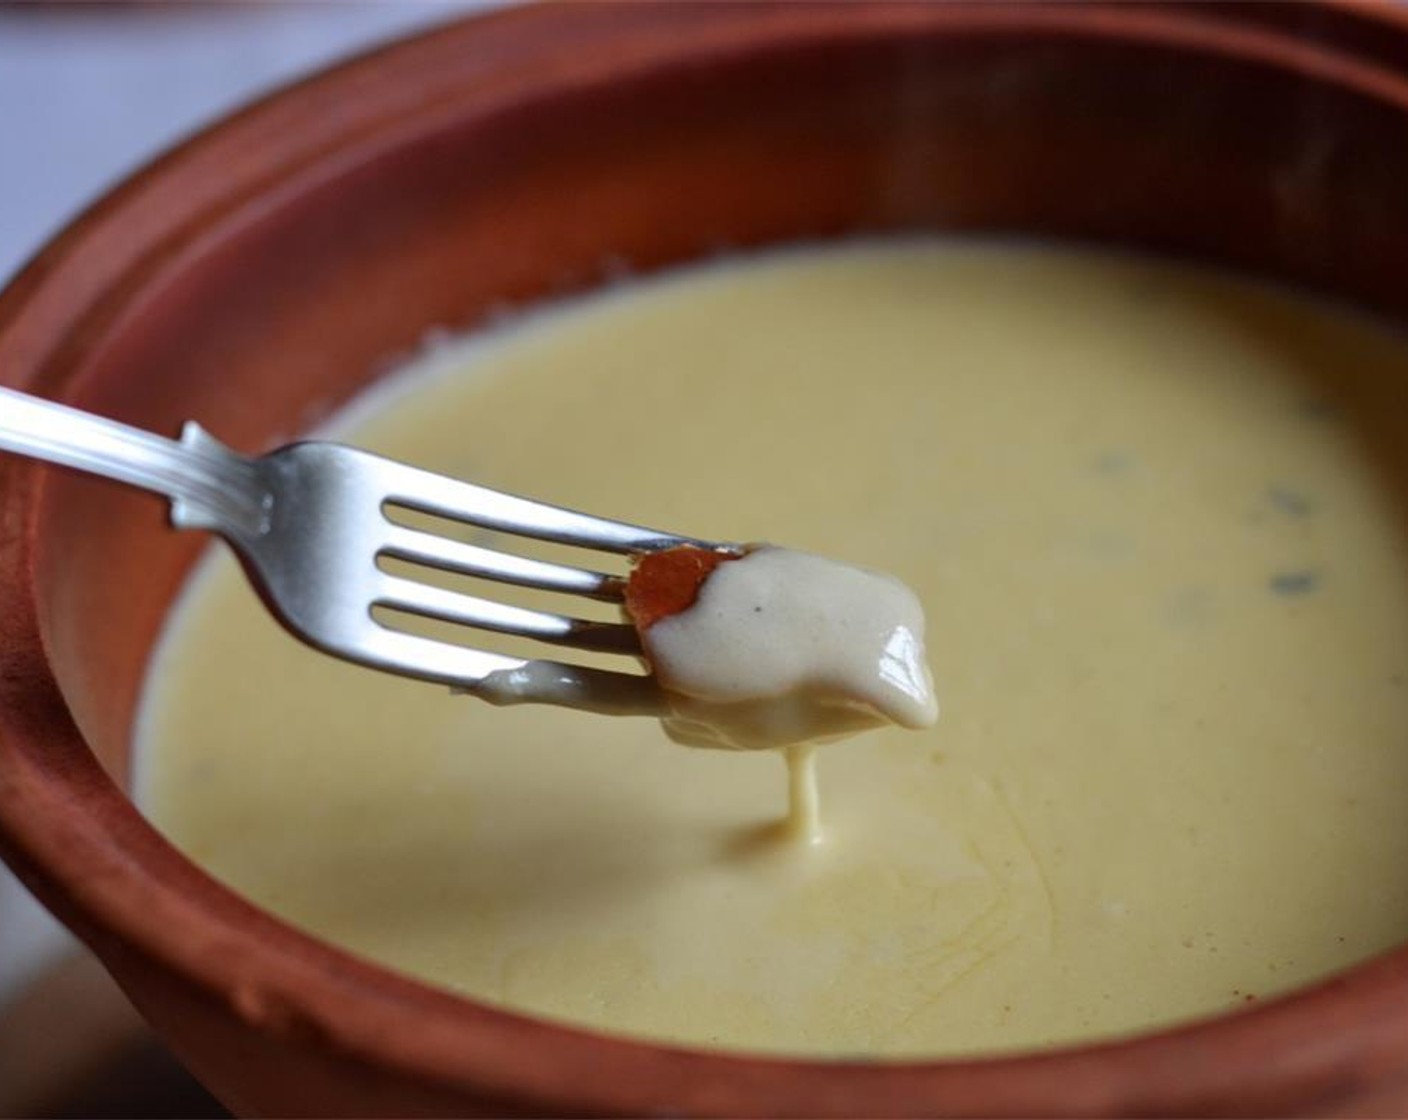 step 4 Meanwhile, rub the inside of a warmed ceramic or earthenware pot with the Halved Garlic (1 clove). When the cheese has melted entirely and the resulting fondue has a creamy silken consistency with a cheesy pull, pour the mixture into the ceramic pot.